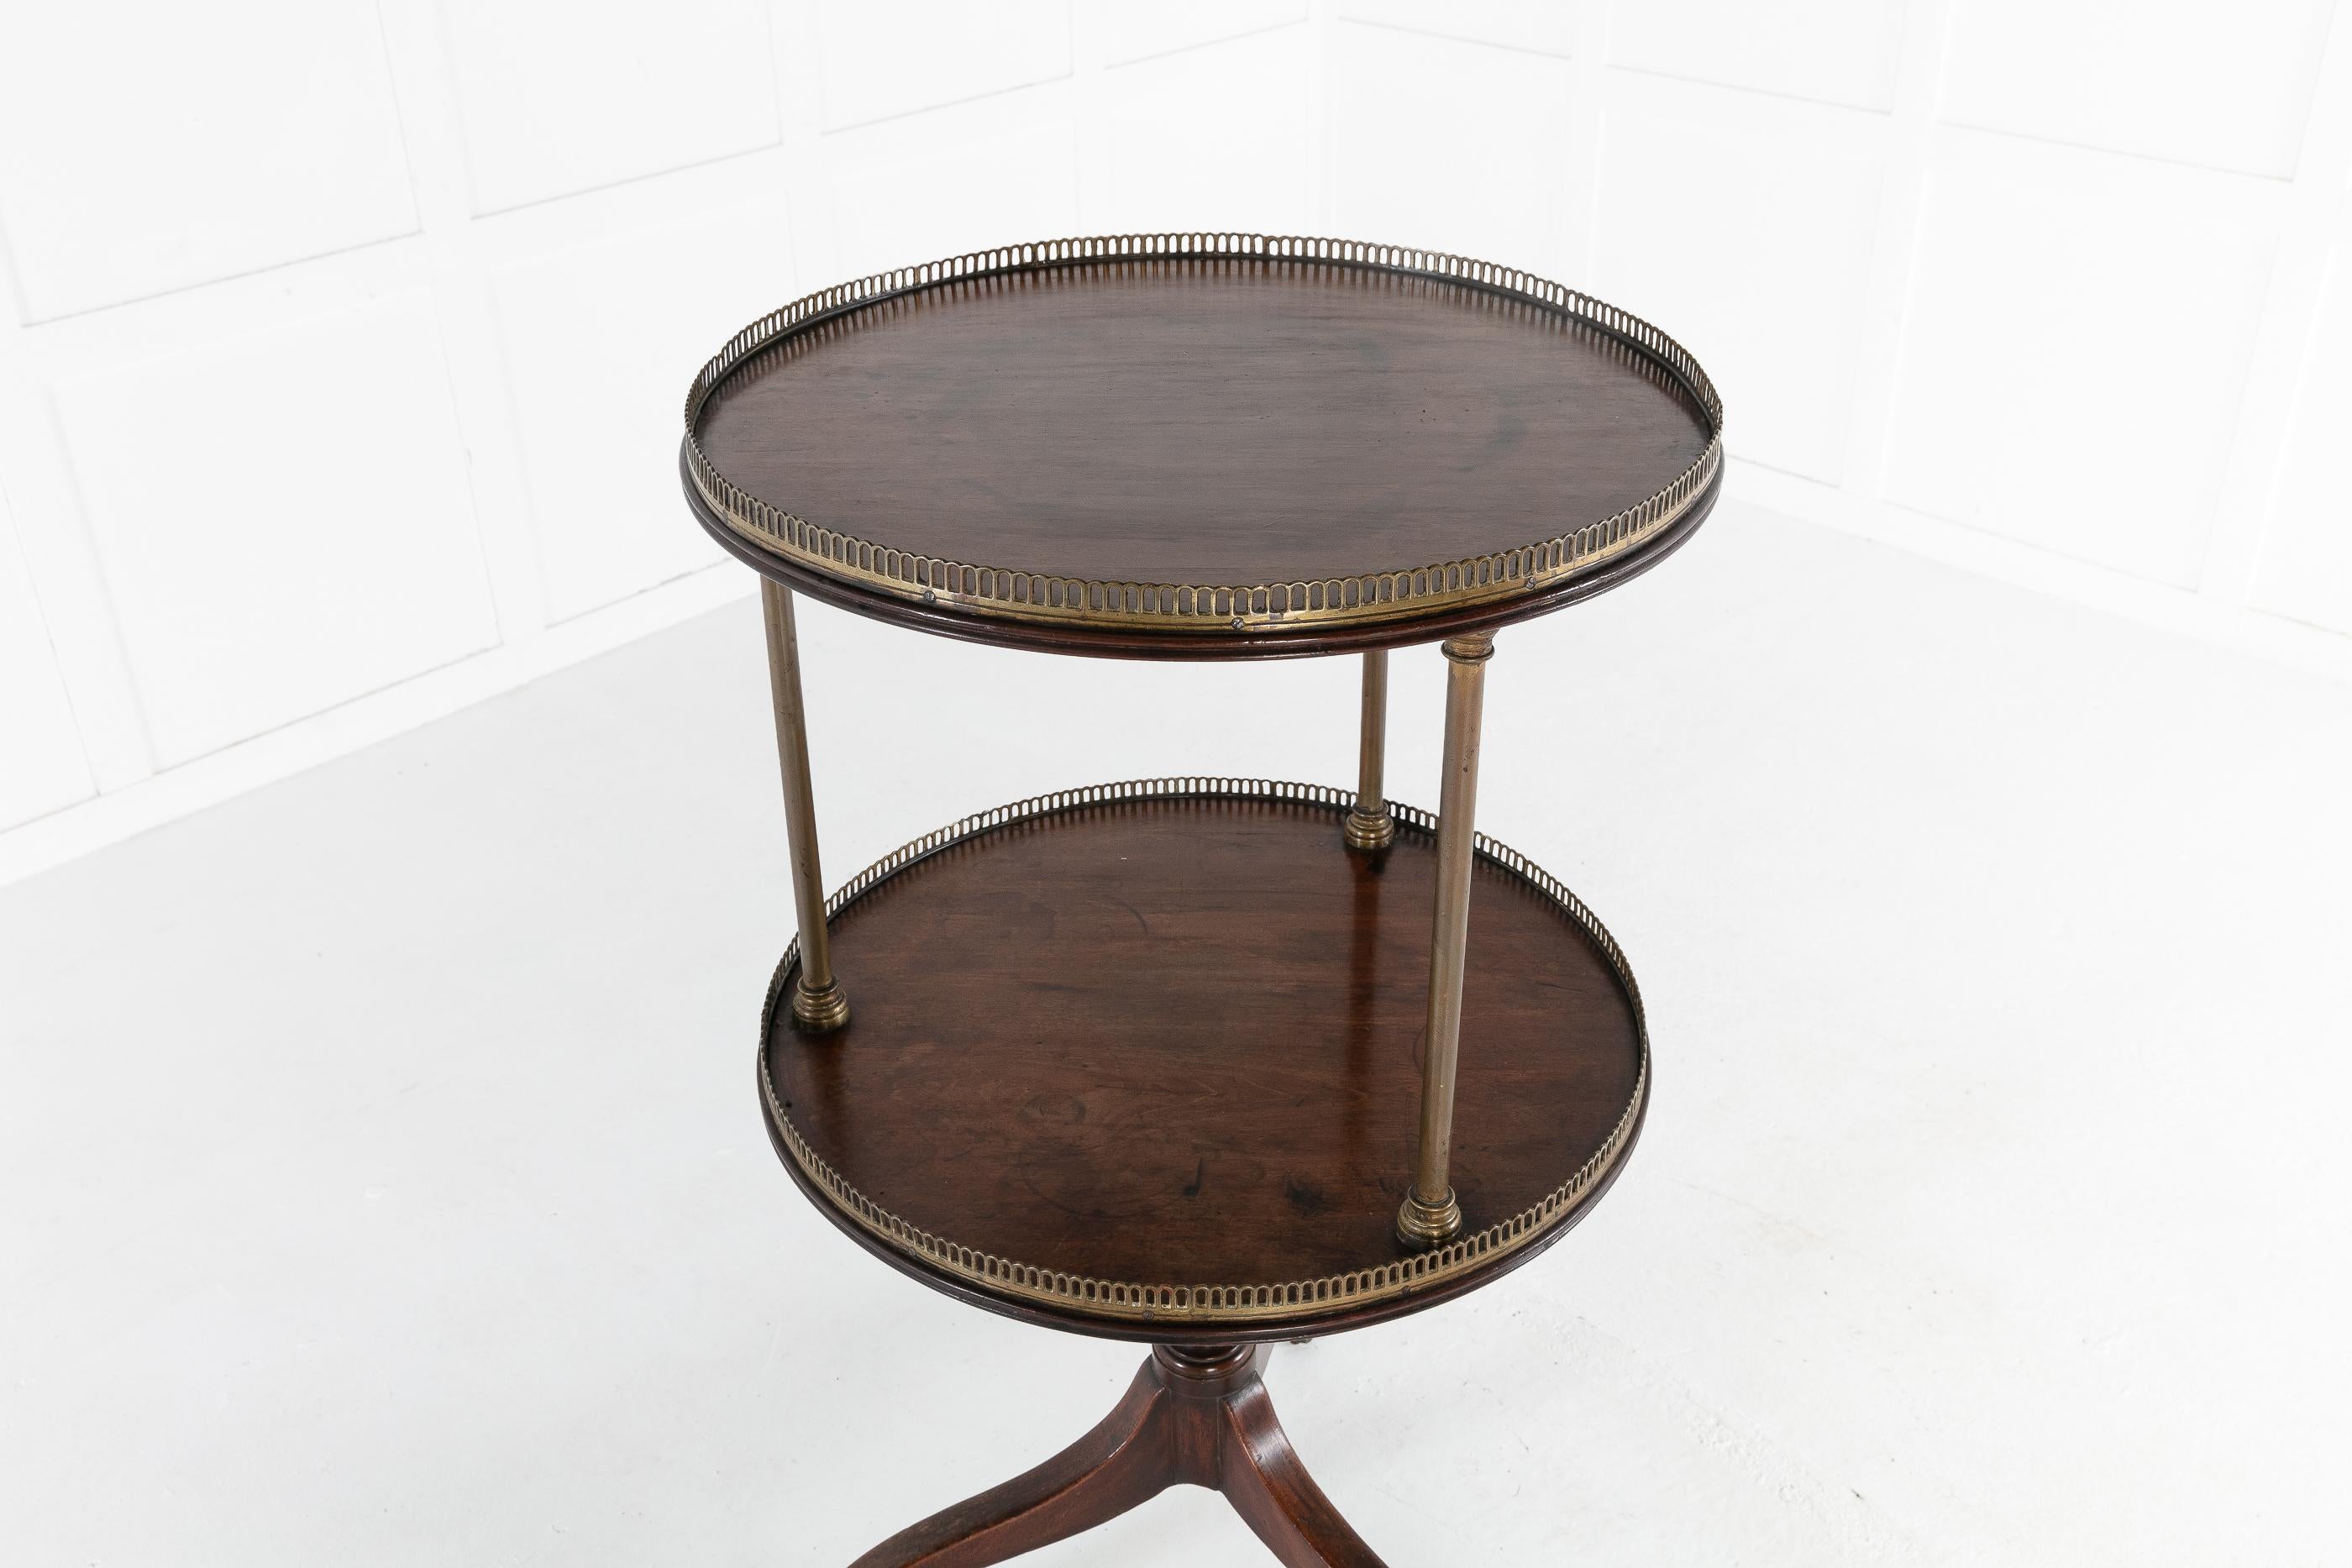 19th century English Regency mahogany two-tier dumb waiter. Each circular tier surmounted with original pierced brass gallery and supports. Raised on a tripod base ending in brass sabot and casters. Having nice proportions.